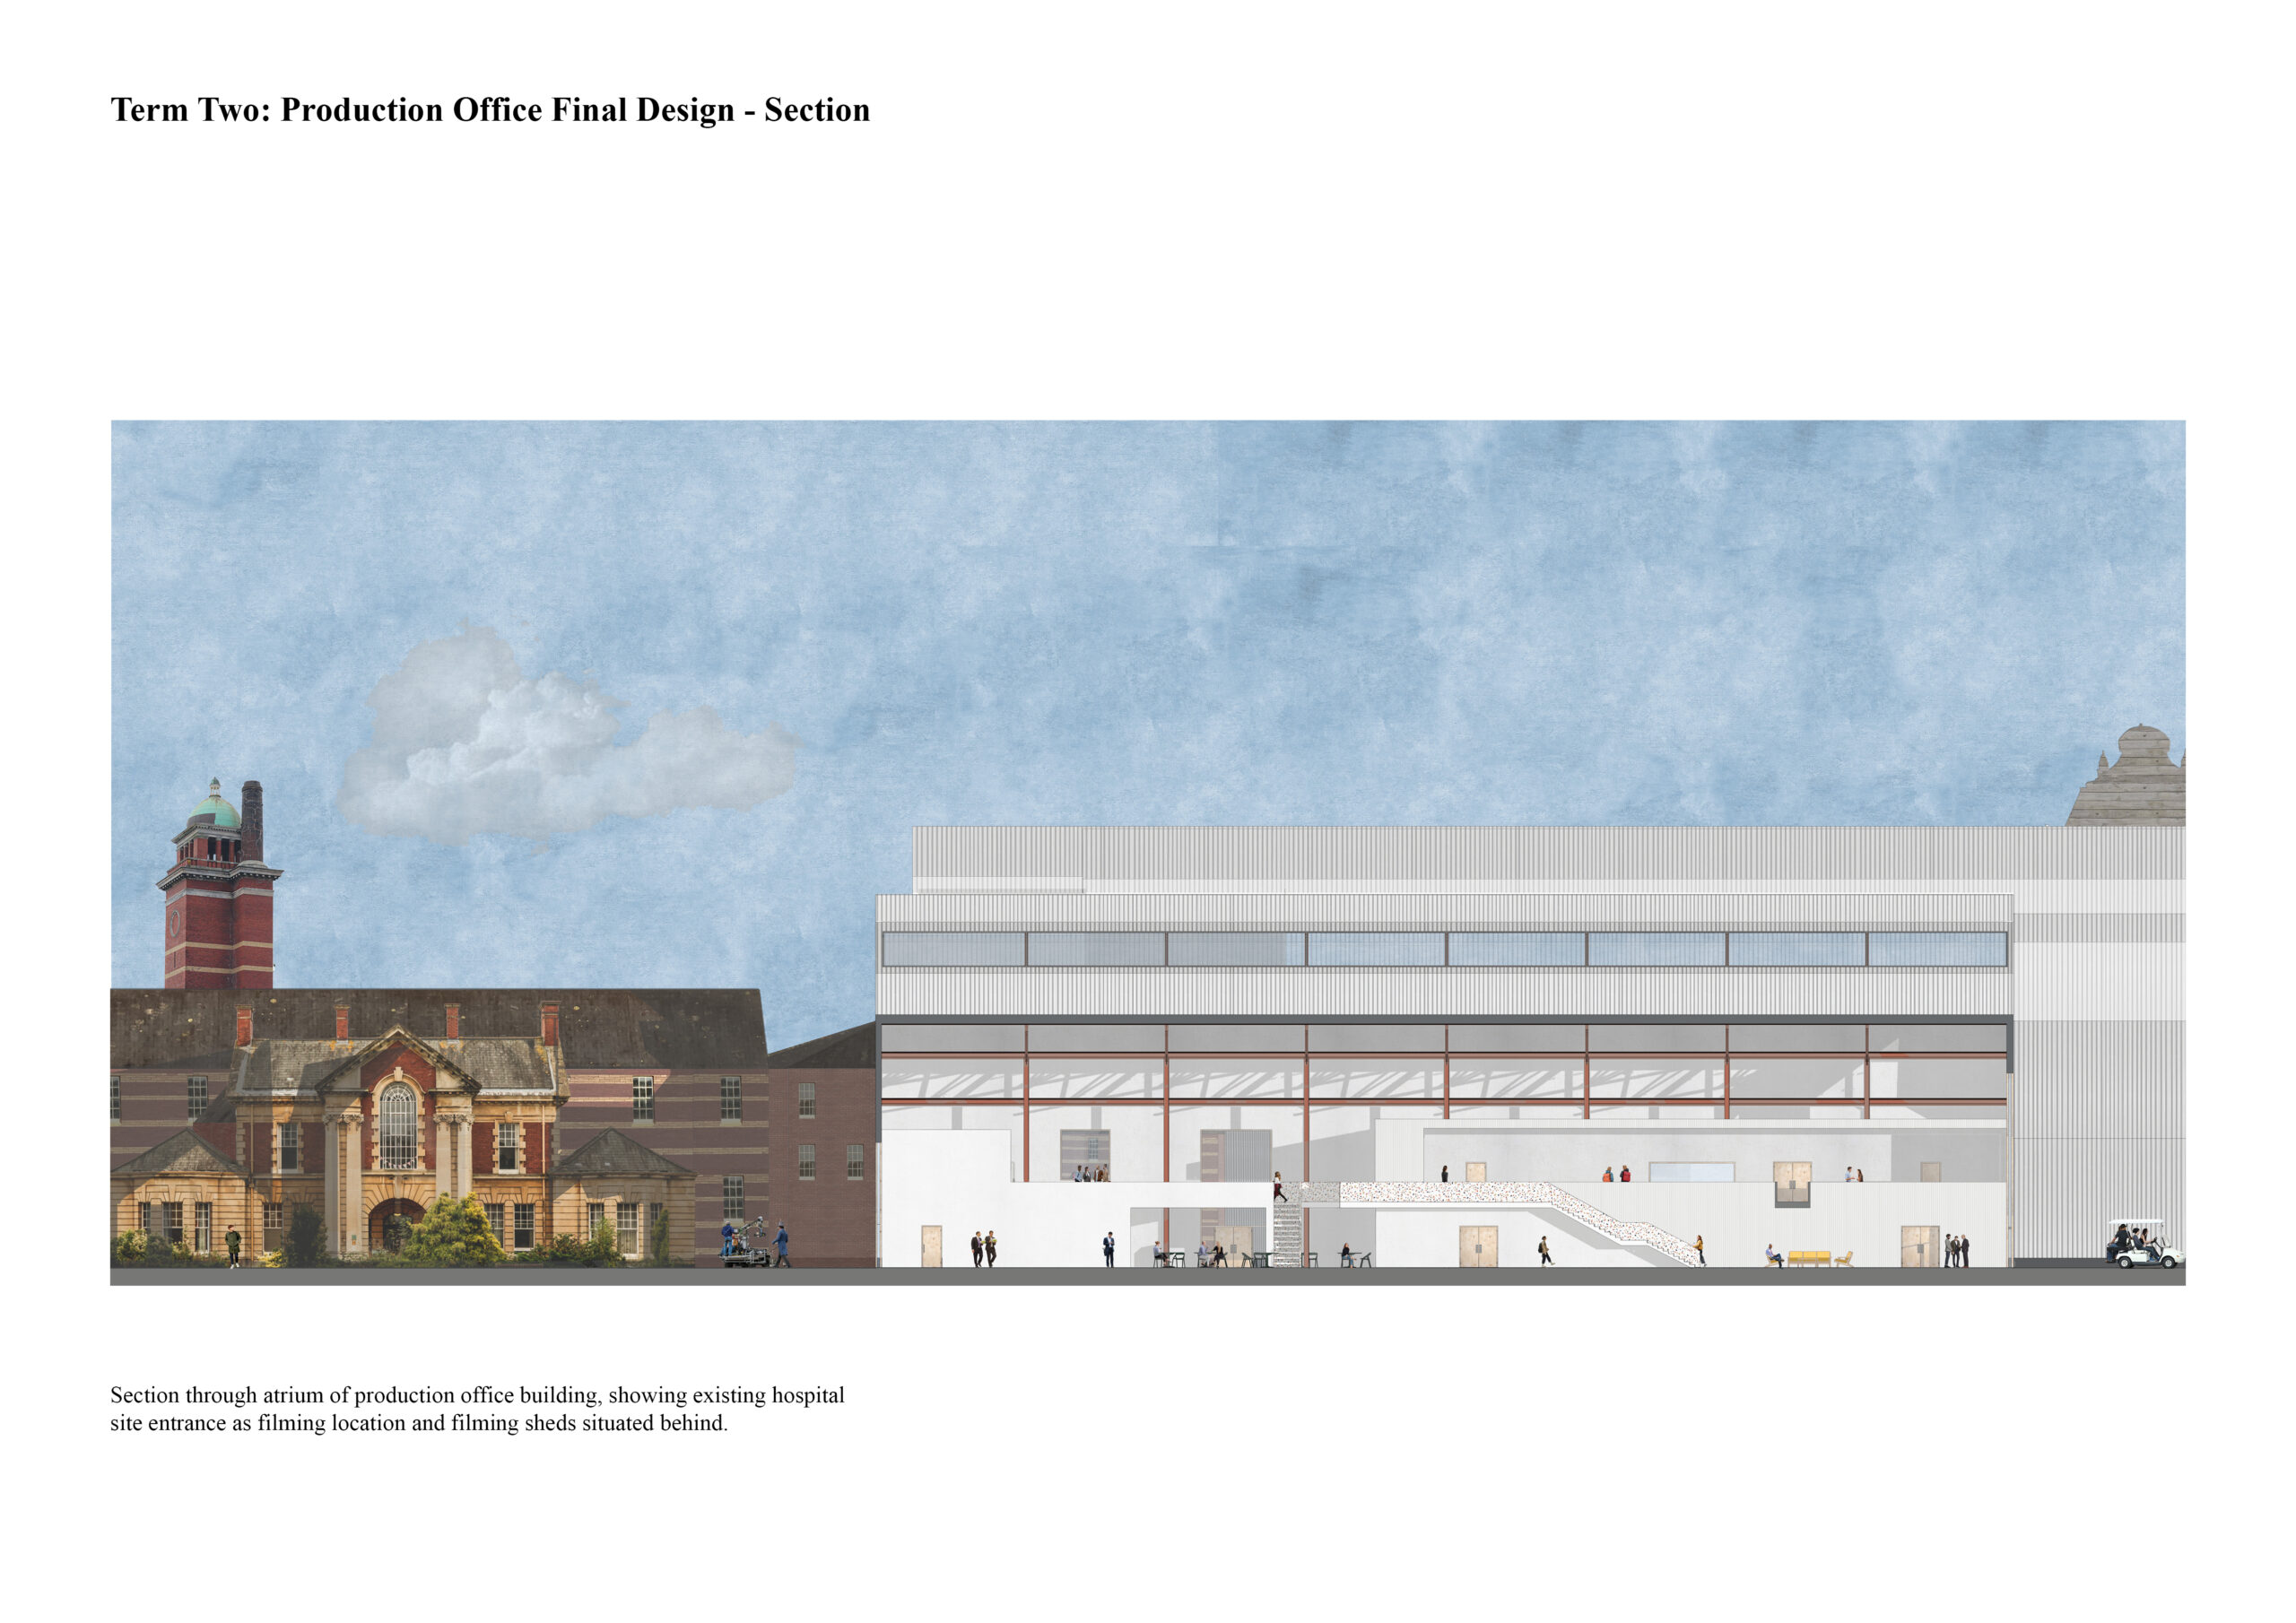 Portfolio Page of a section of the production office that showcases the atrium and the existing hospital behind.